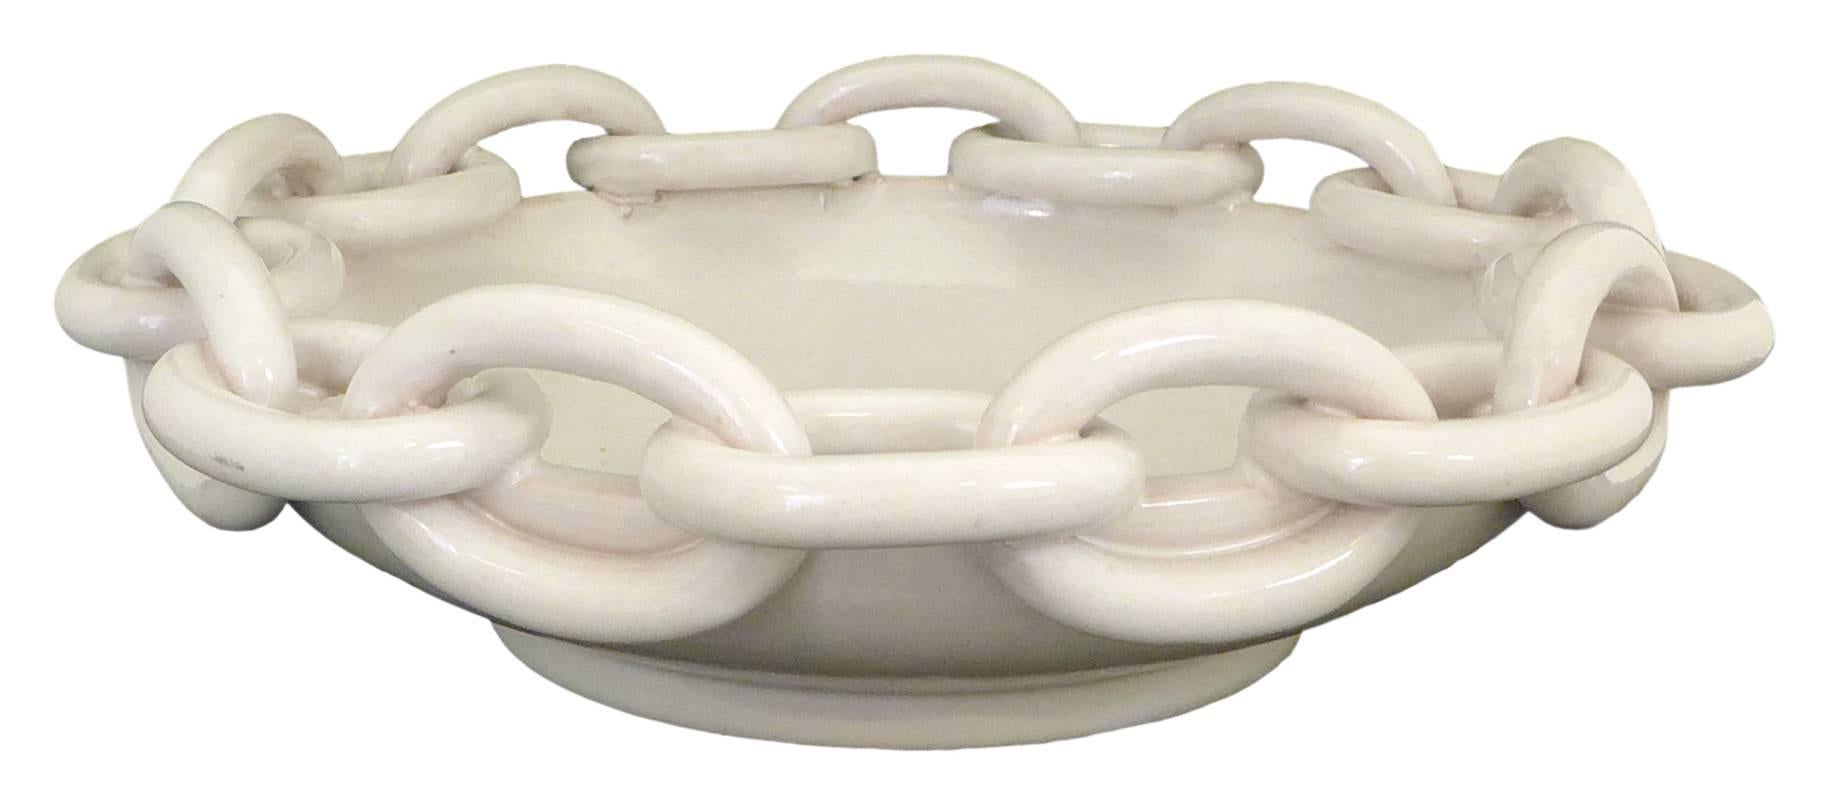 An elegant and subtly surreal ceramic chain bowl by ND Dolfi for Bergdorf Goodman.  Resplendent in an alluring, monochrome white glaze, an exceptional, utilitarian decorative object.